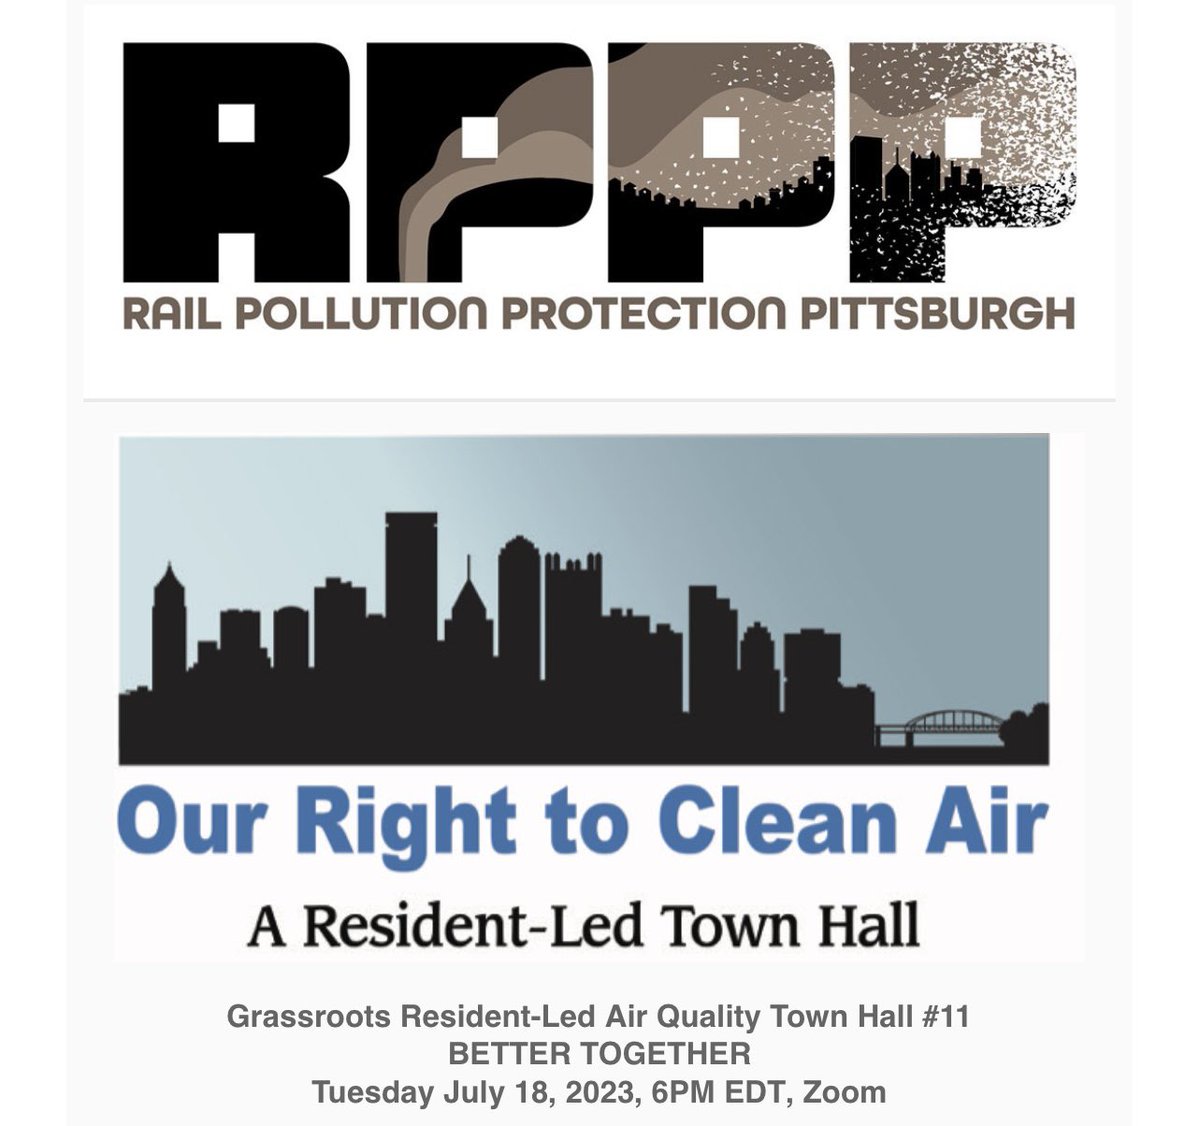 Allegheny County Resident-Led Air Quality Town Hall #11 
BETTER TOGETHER

Register:
…ectionpittsburgh.us19.list-manage.com/track/click?u=…